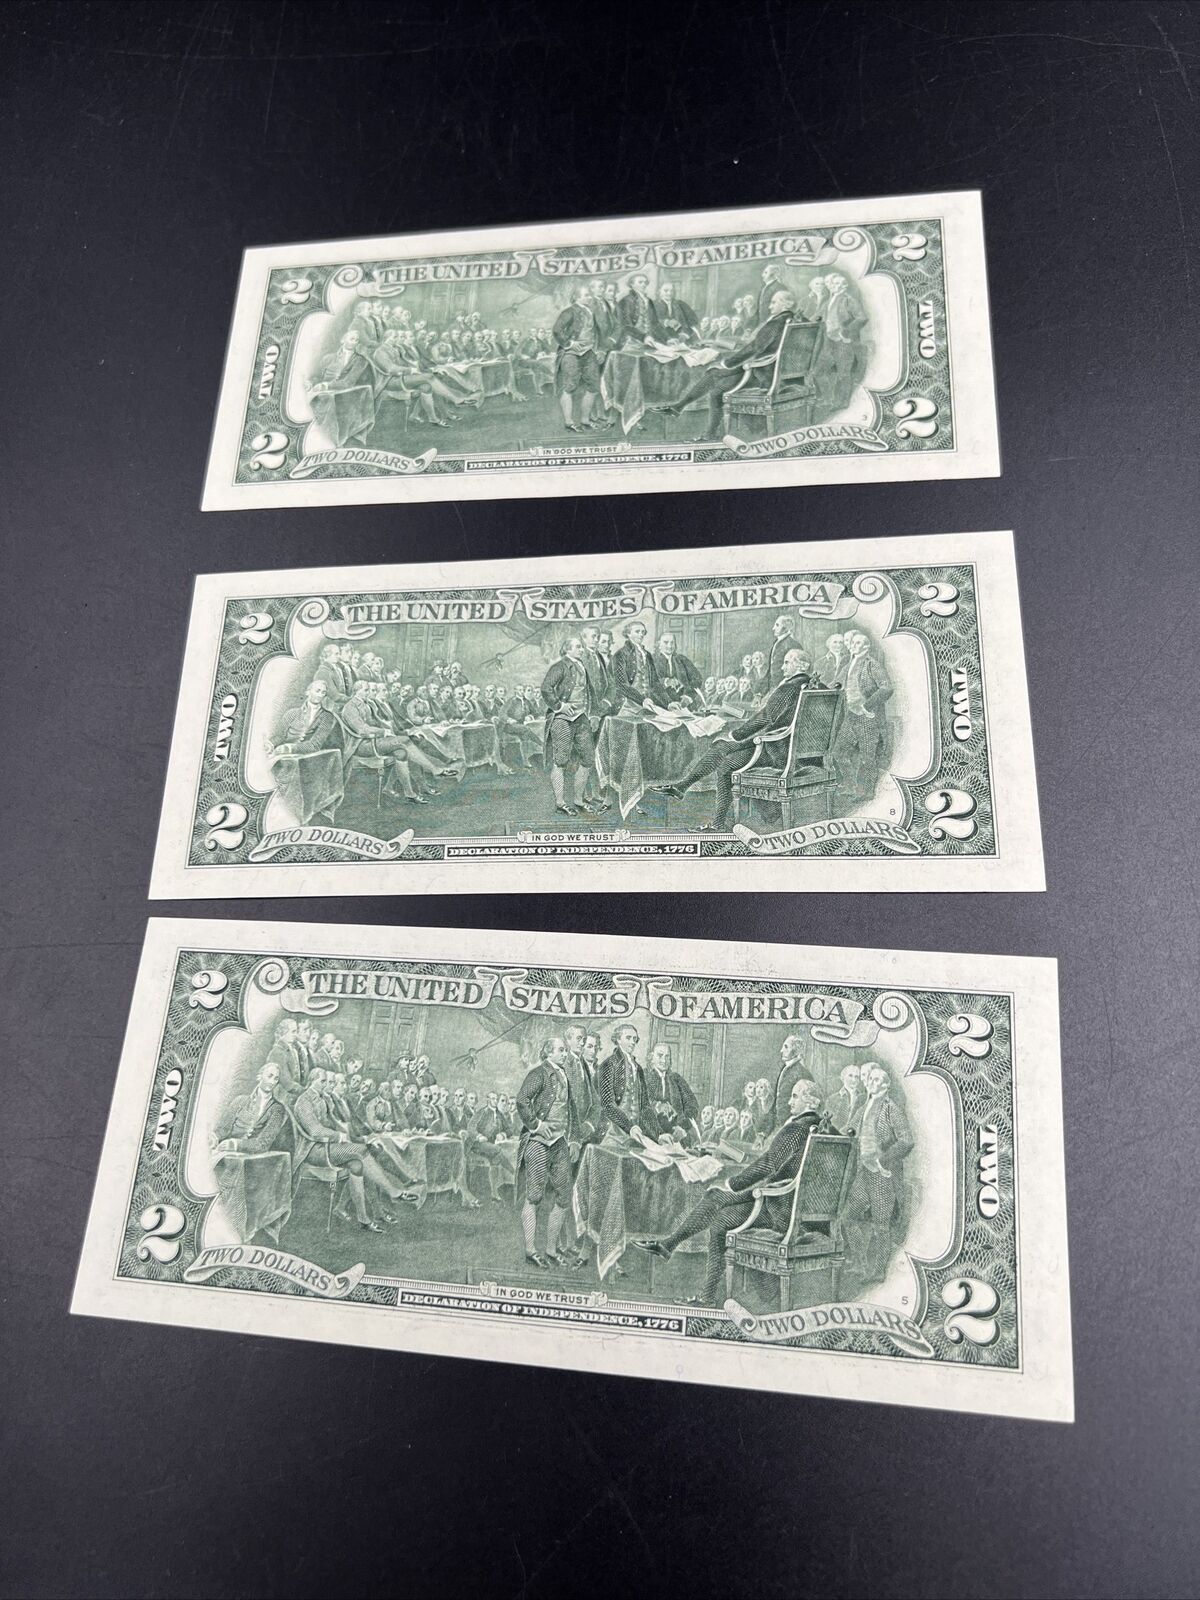 3 Consecutive 2003 $2 Two Dollar Bills w/ Repeat Serial Numbers #999 CH UNC